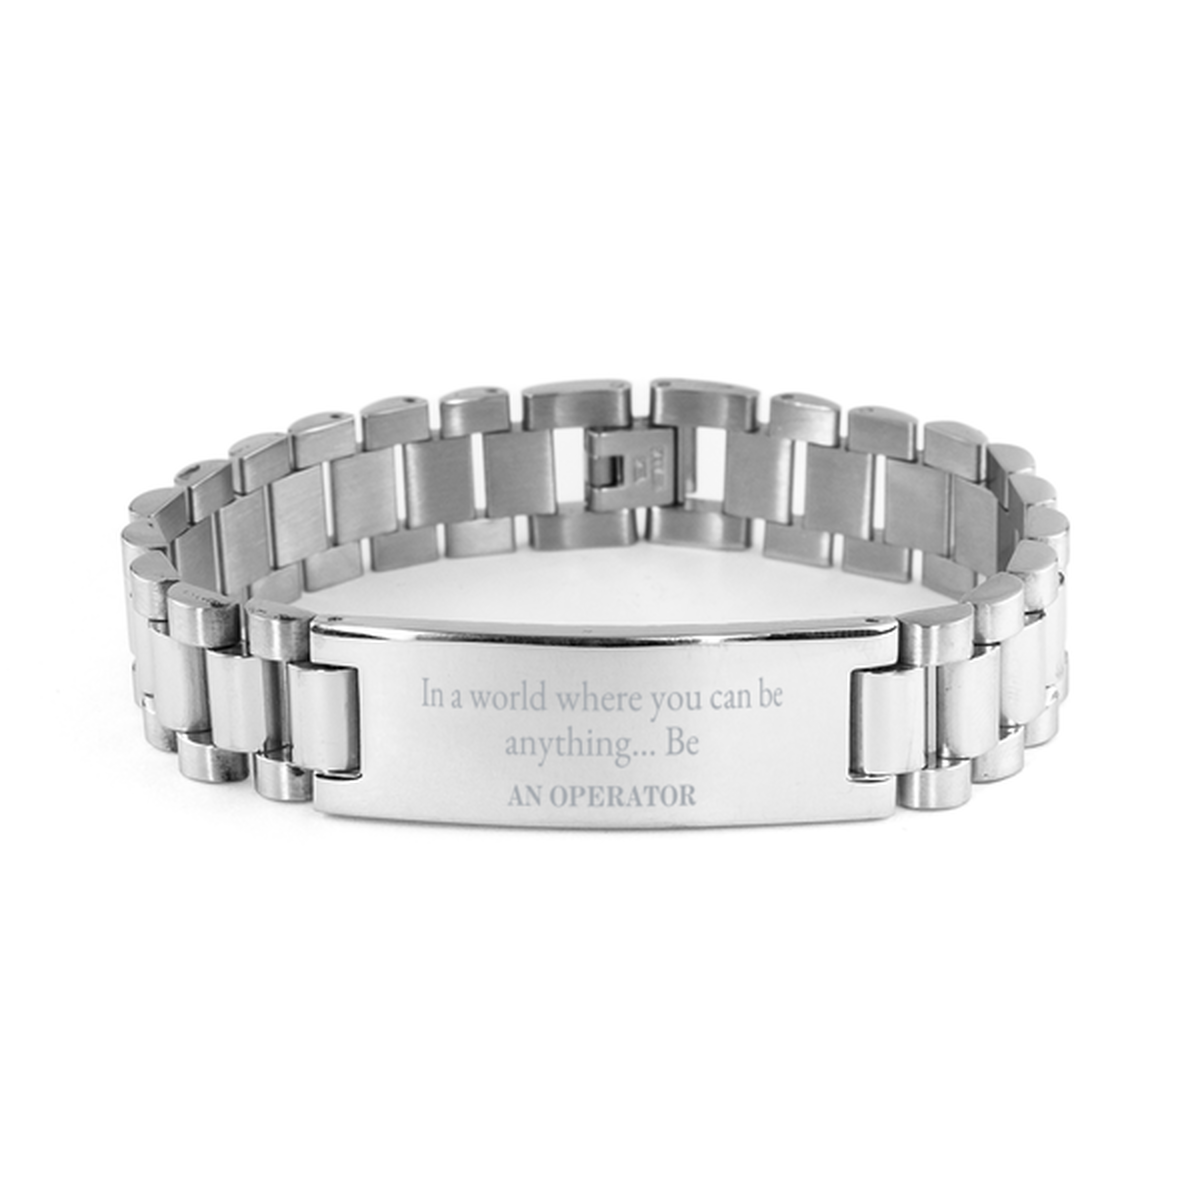 Gifts for Operator, In a world where you can be anything, Appreciation Birthday Ladder Stainless Steel Bracelet for Men, Women, Friends, Coworkers